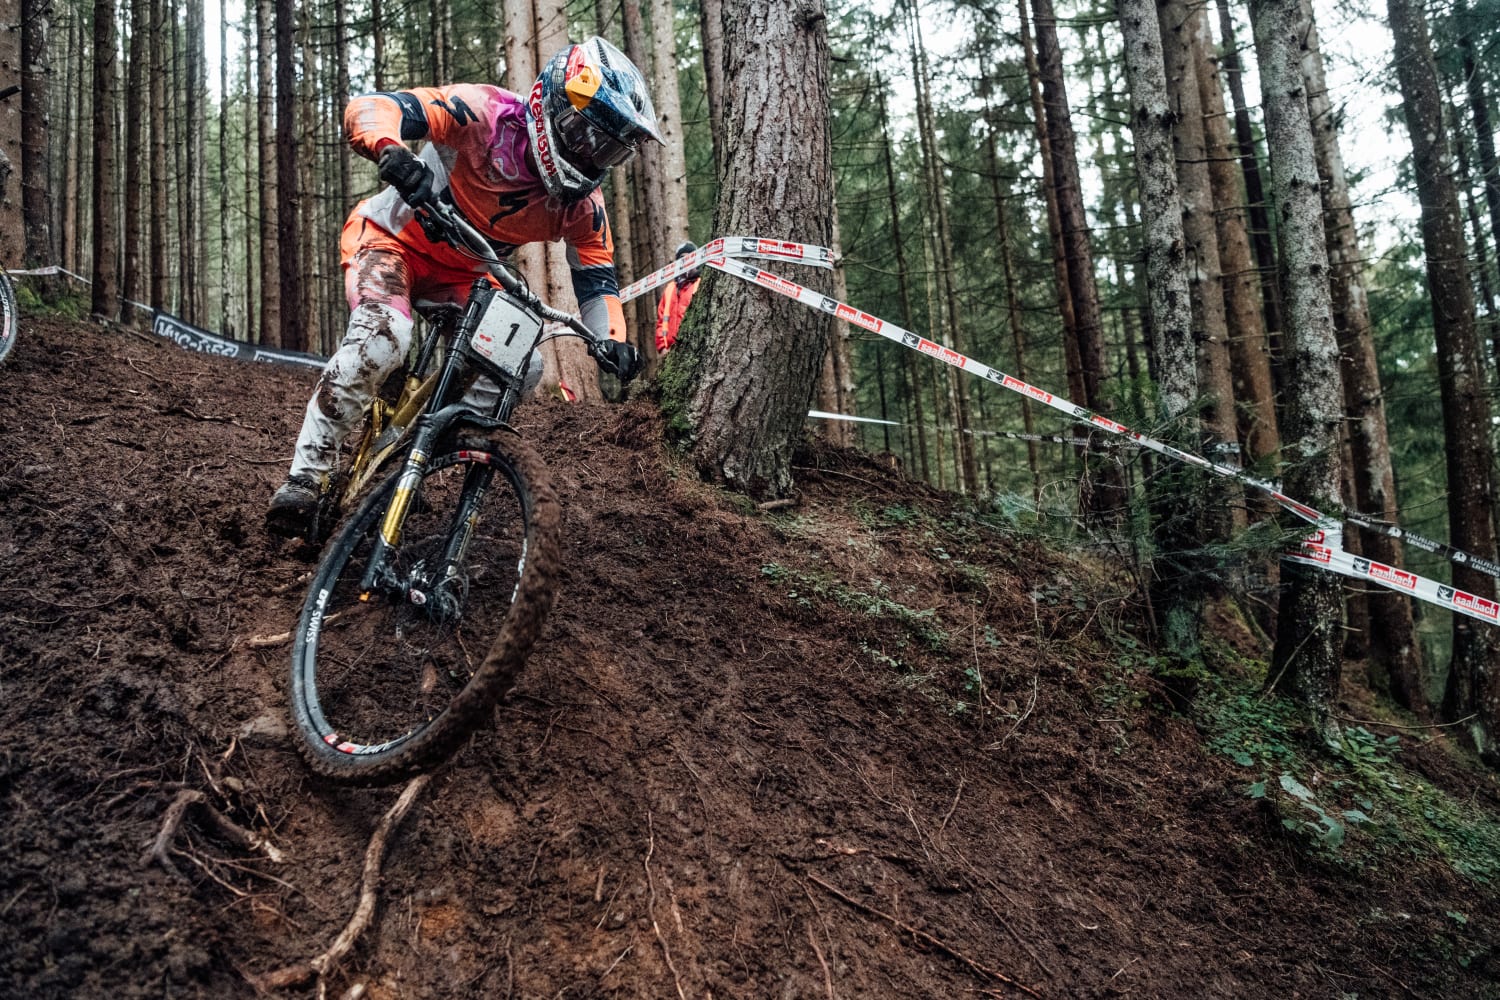 Uci Calendrier 2022 2021 and 2022 UCI MTB World Cup calendar: DH/XCO dates